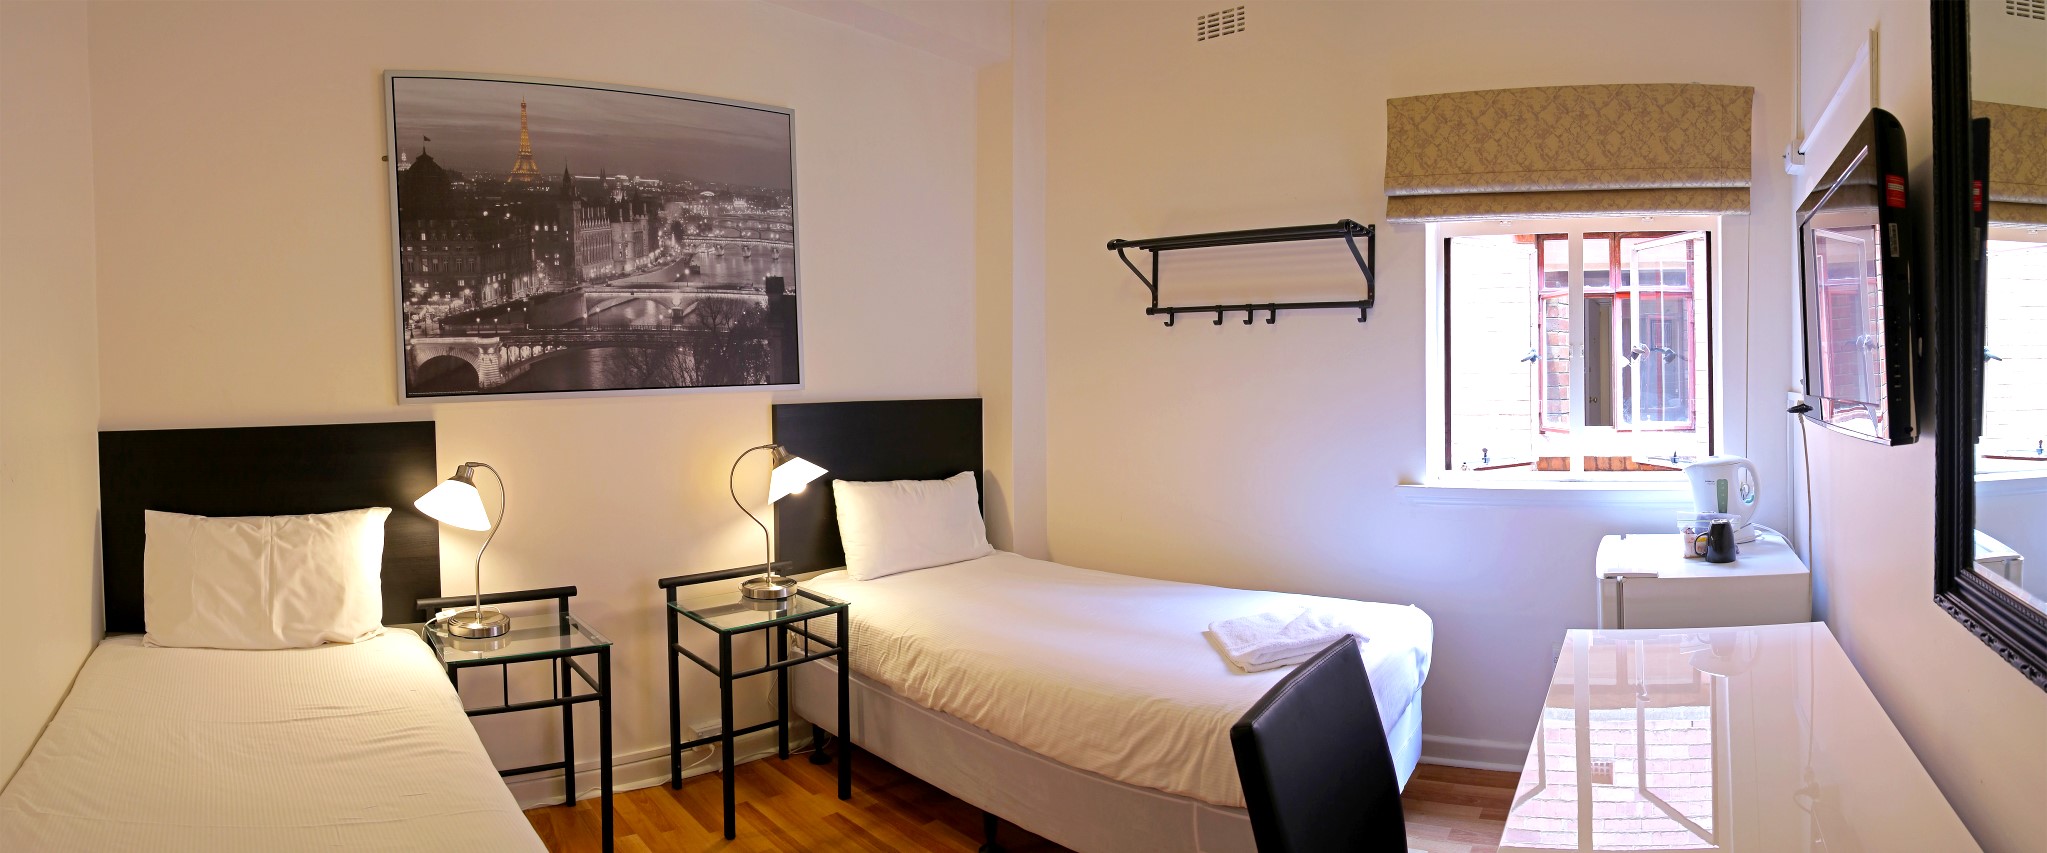 City Centre Budget Hotel, Single or Twin Room - for 1-2 people - click to see an enlarged version of this image